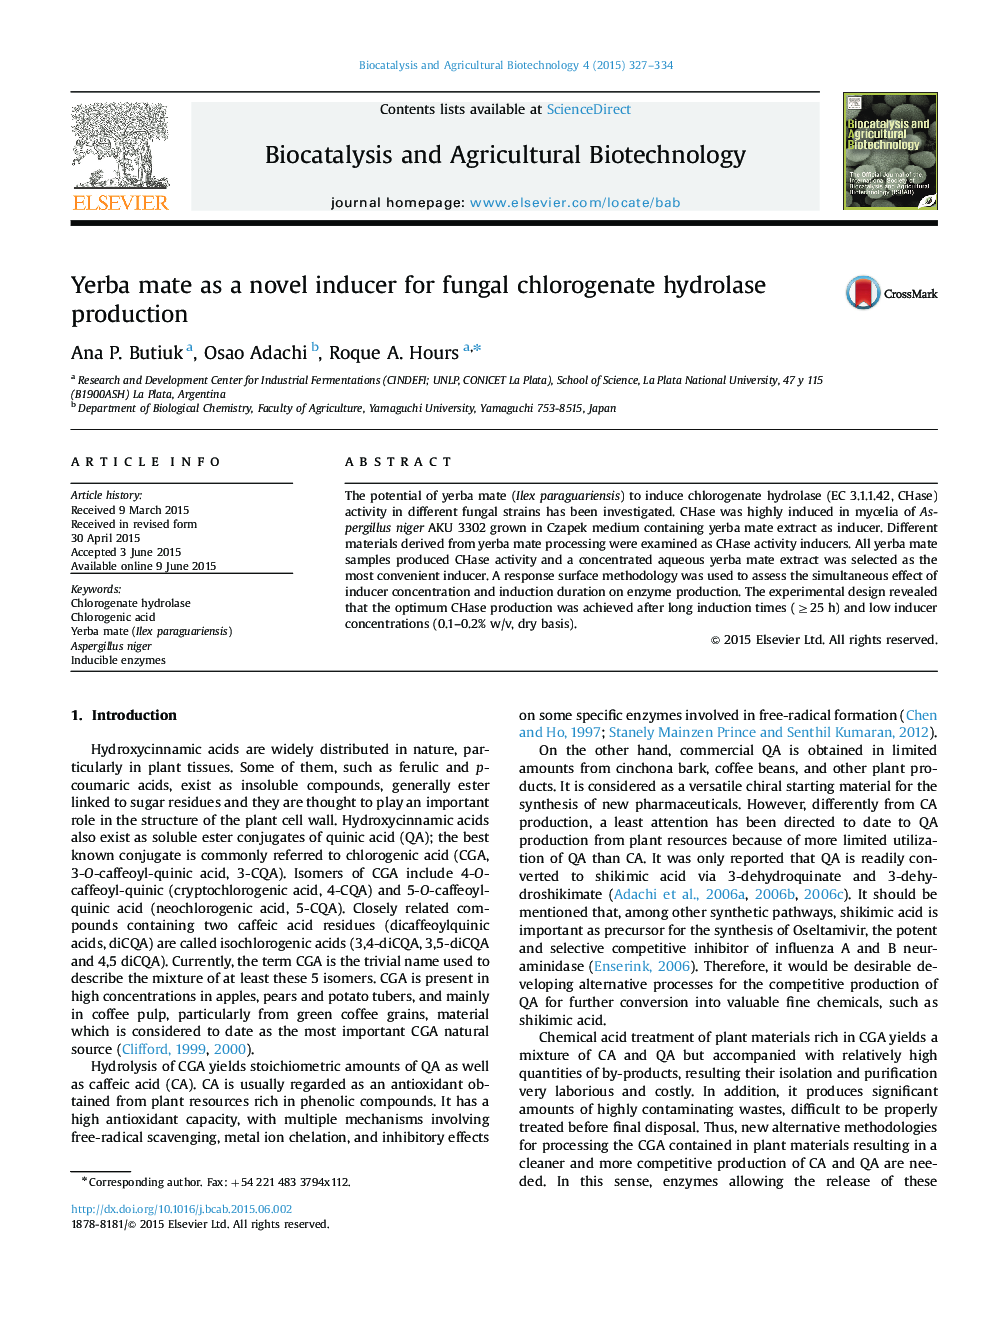 Yerba mate as a novel inducer for fungal chlorogenate hydrolase production